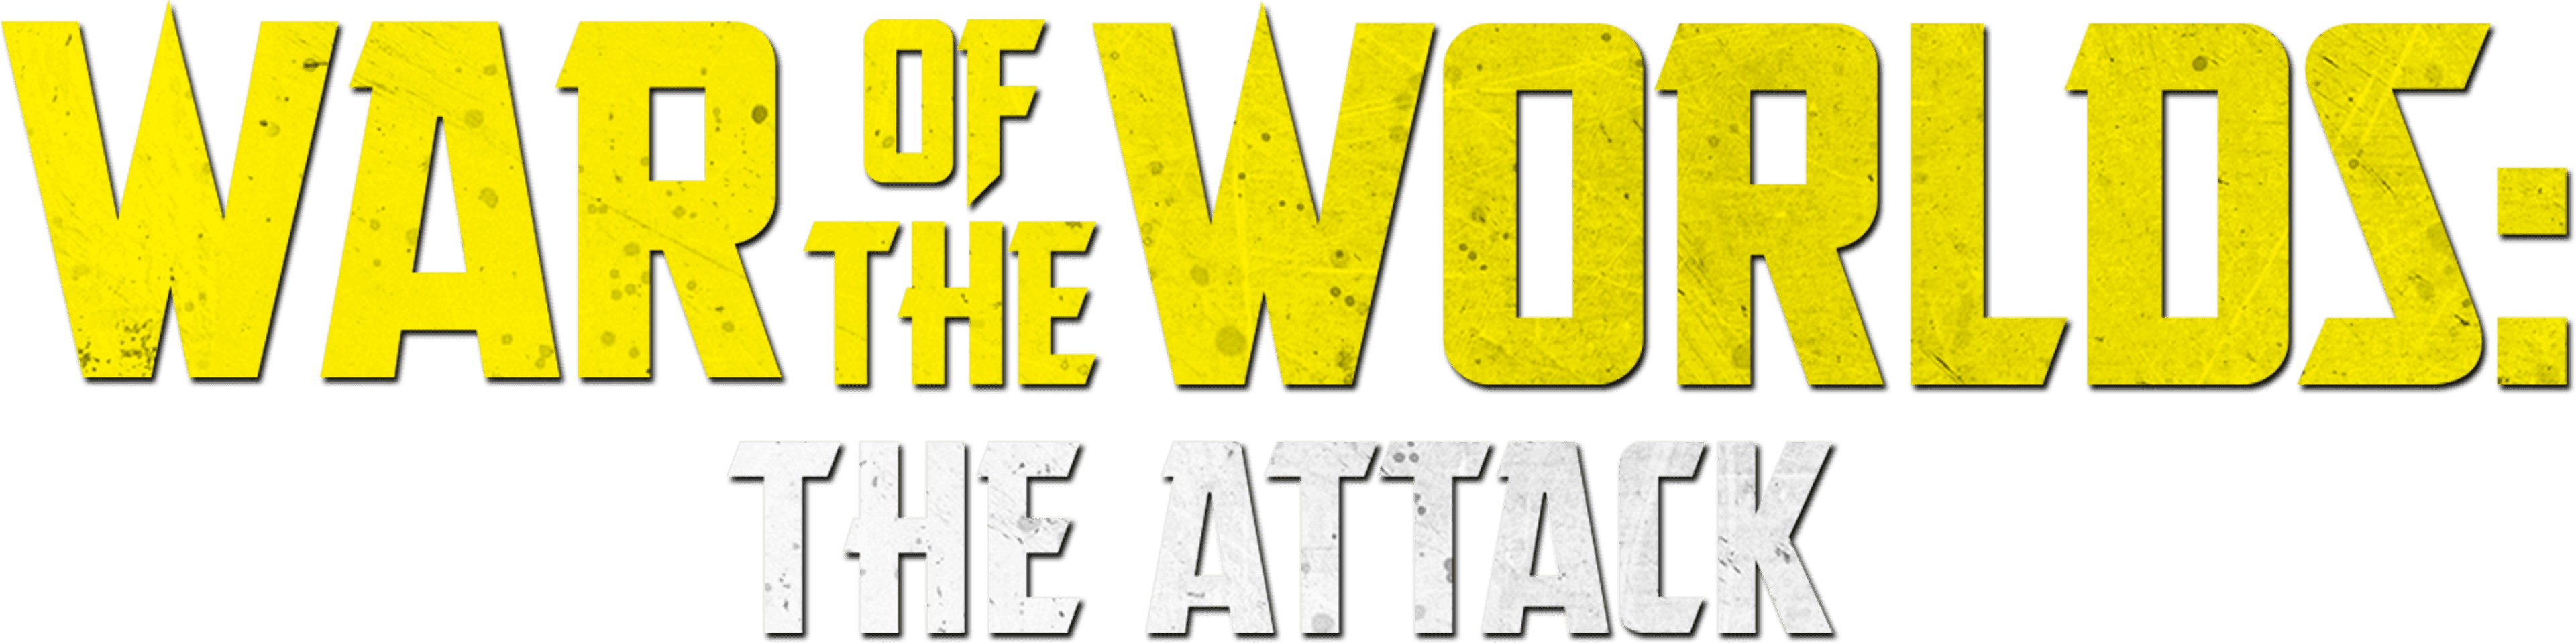 War of the Worlds: The Attack logo